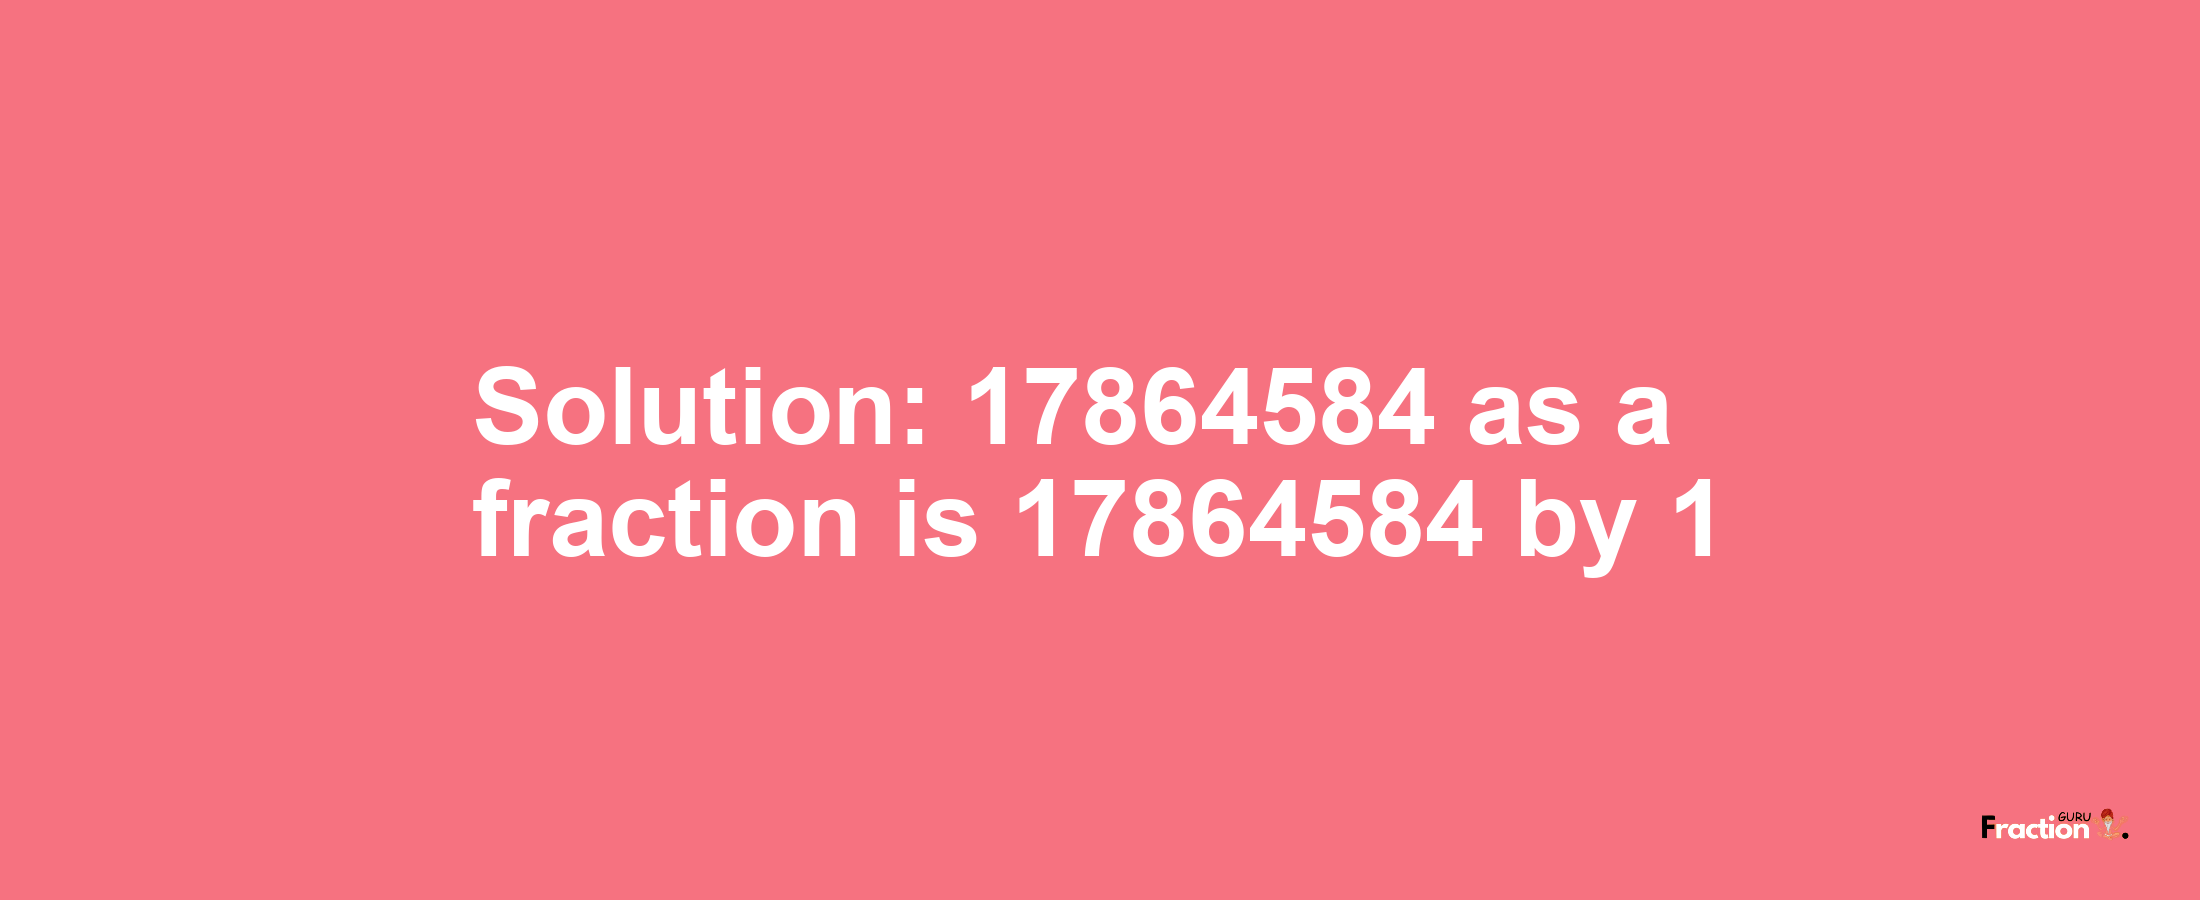 Solution:17864584 as a fraction is 17864584/1